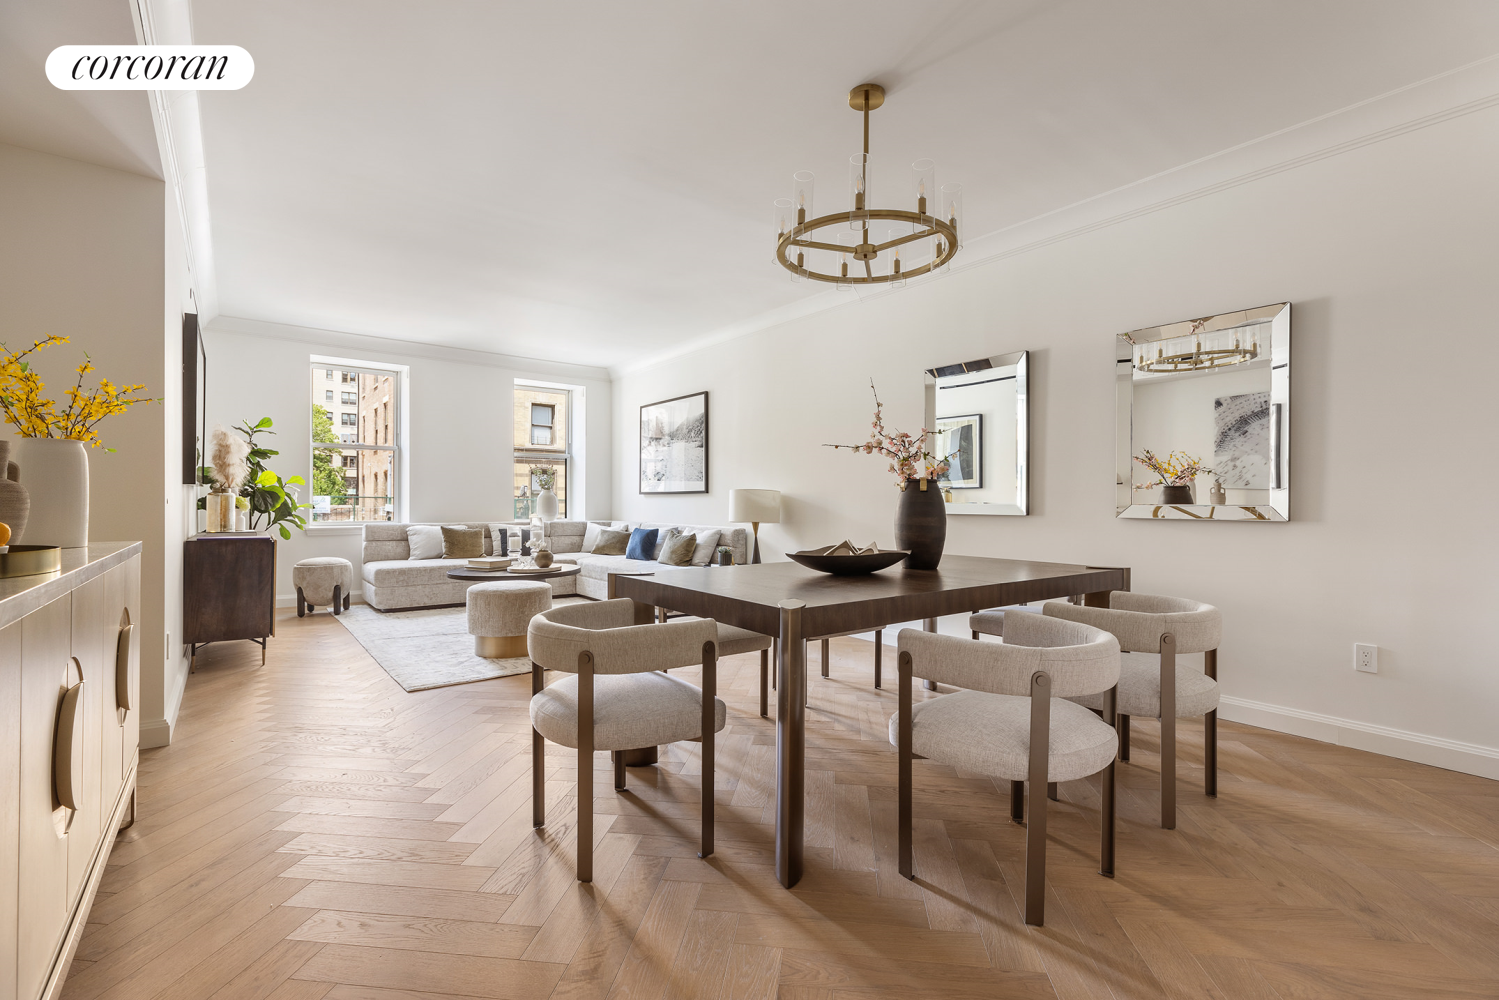 1295 Madison Avenue 2B, Carnegie Hill, Upper East Side, NYC - 2 Bedrooms  
2.5 Bathrooms  
4 Rooms - 